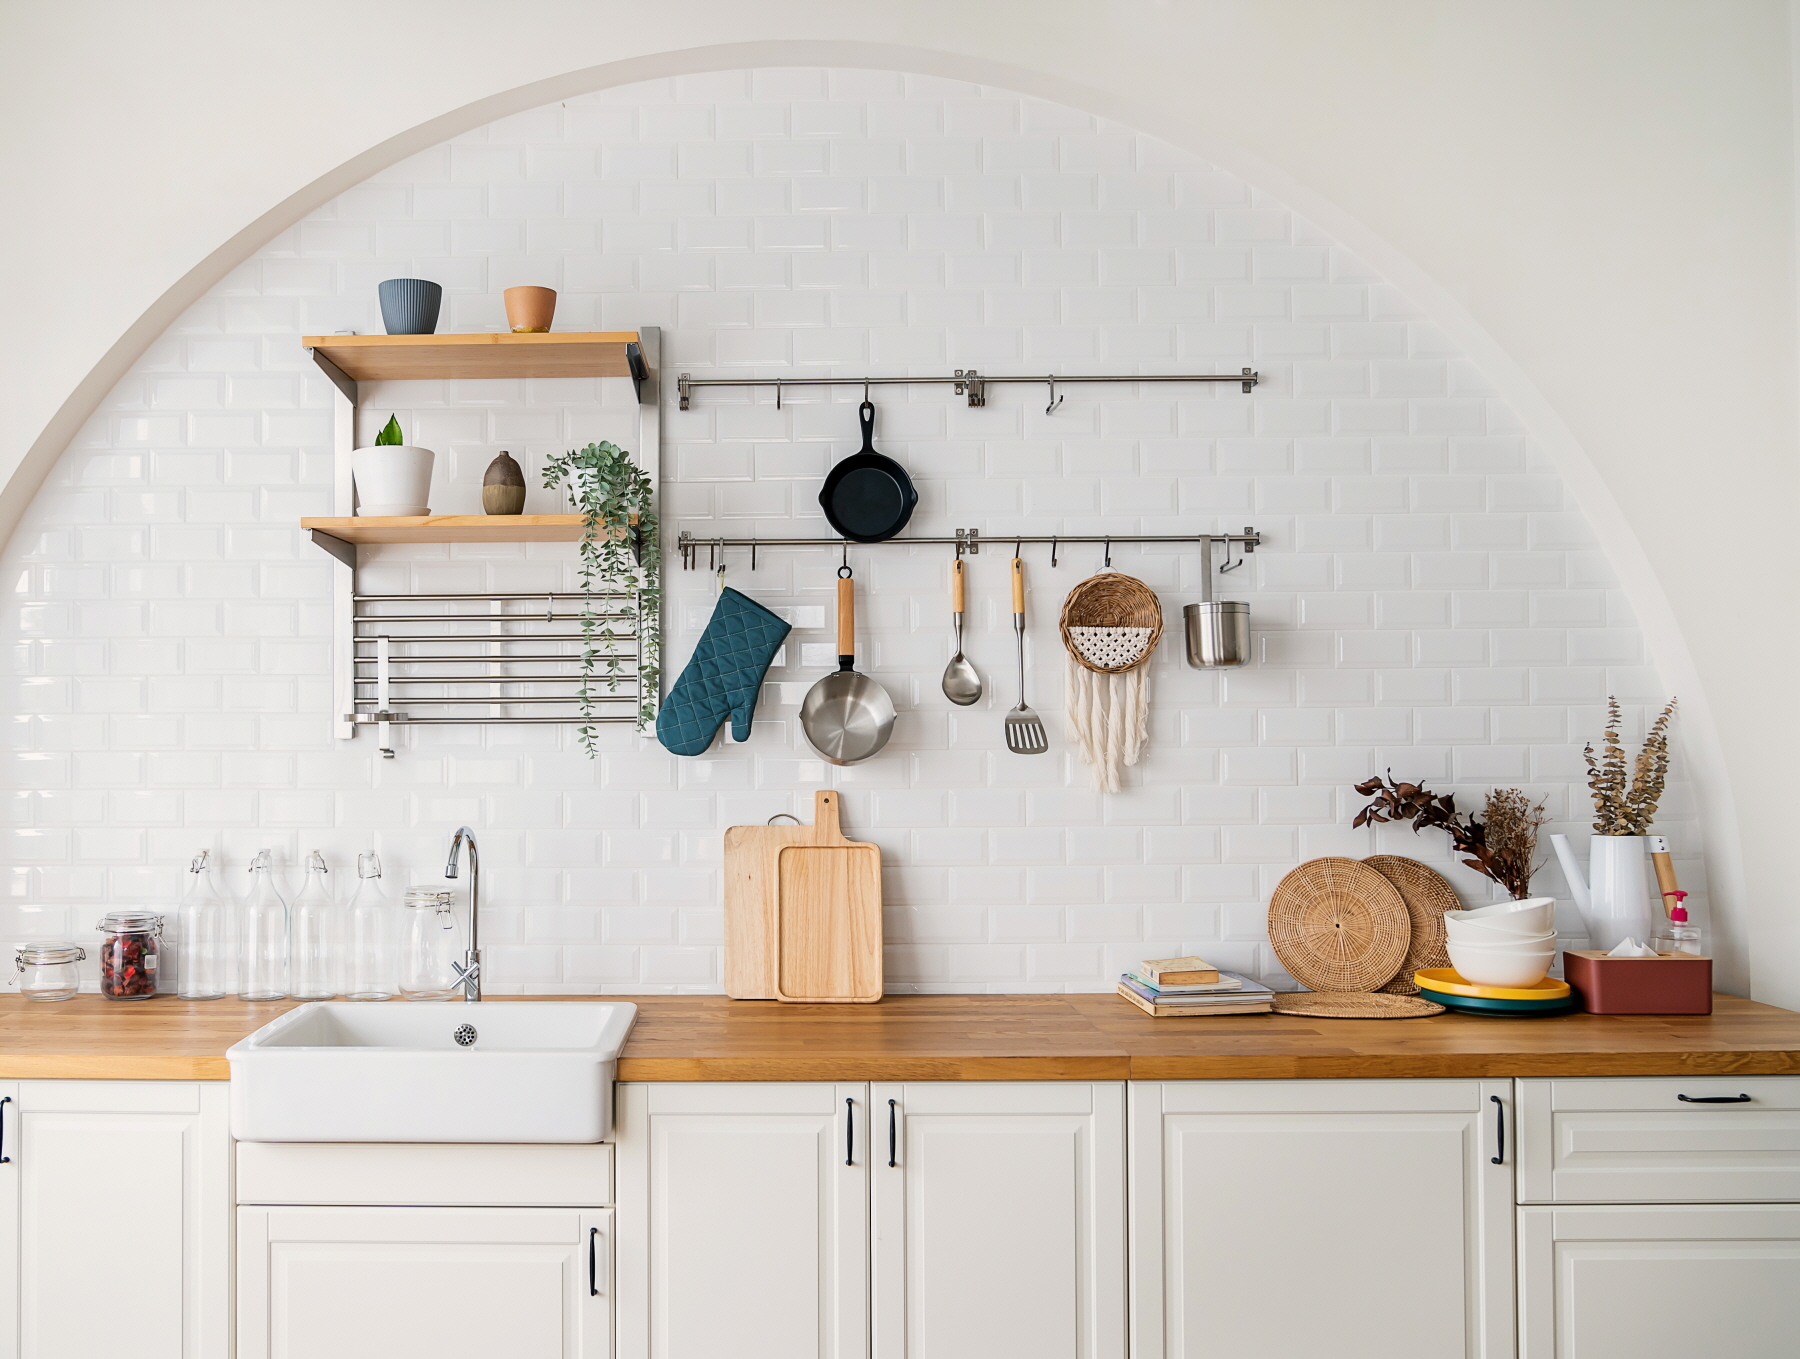 Maximize space in a small kitchen with ceiling storage like hanging racks, freeing up cabinets and adding visual interest.